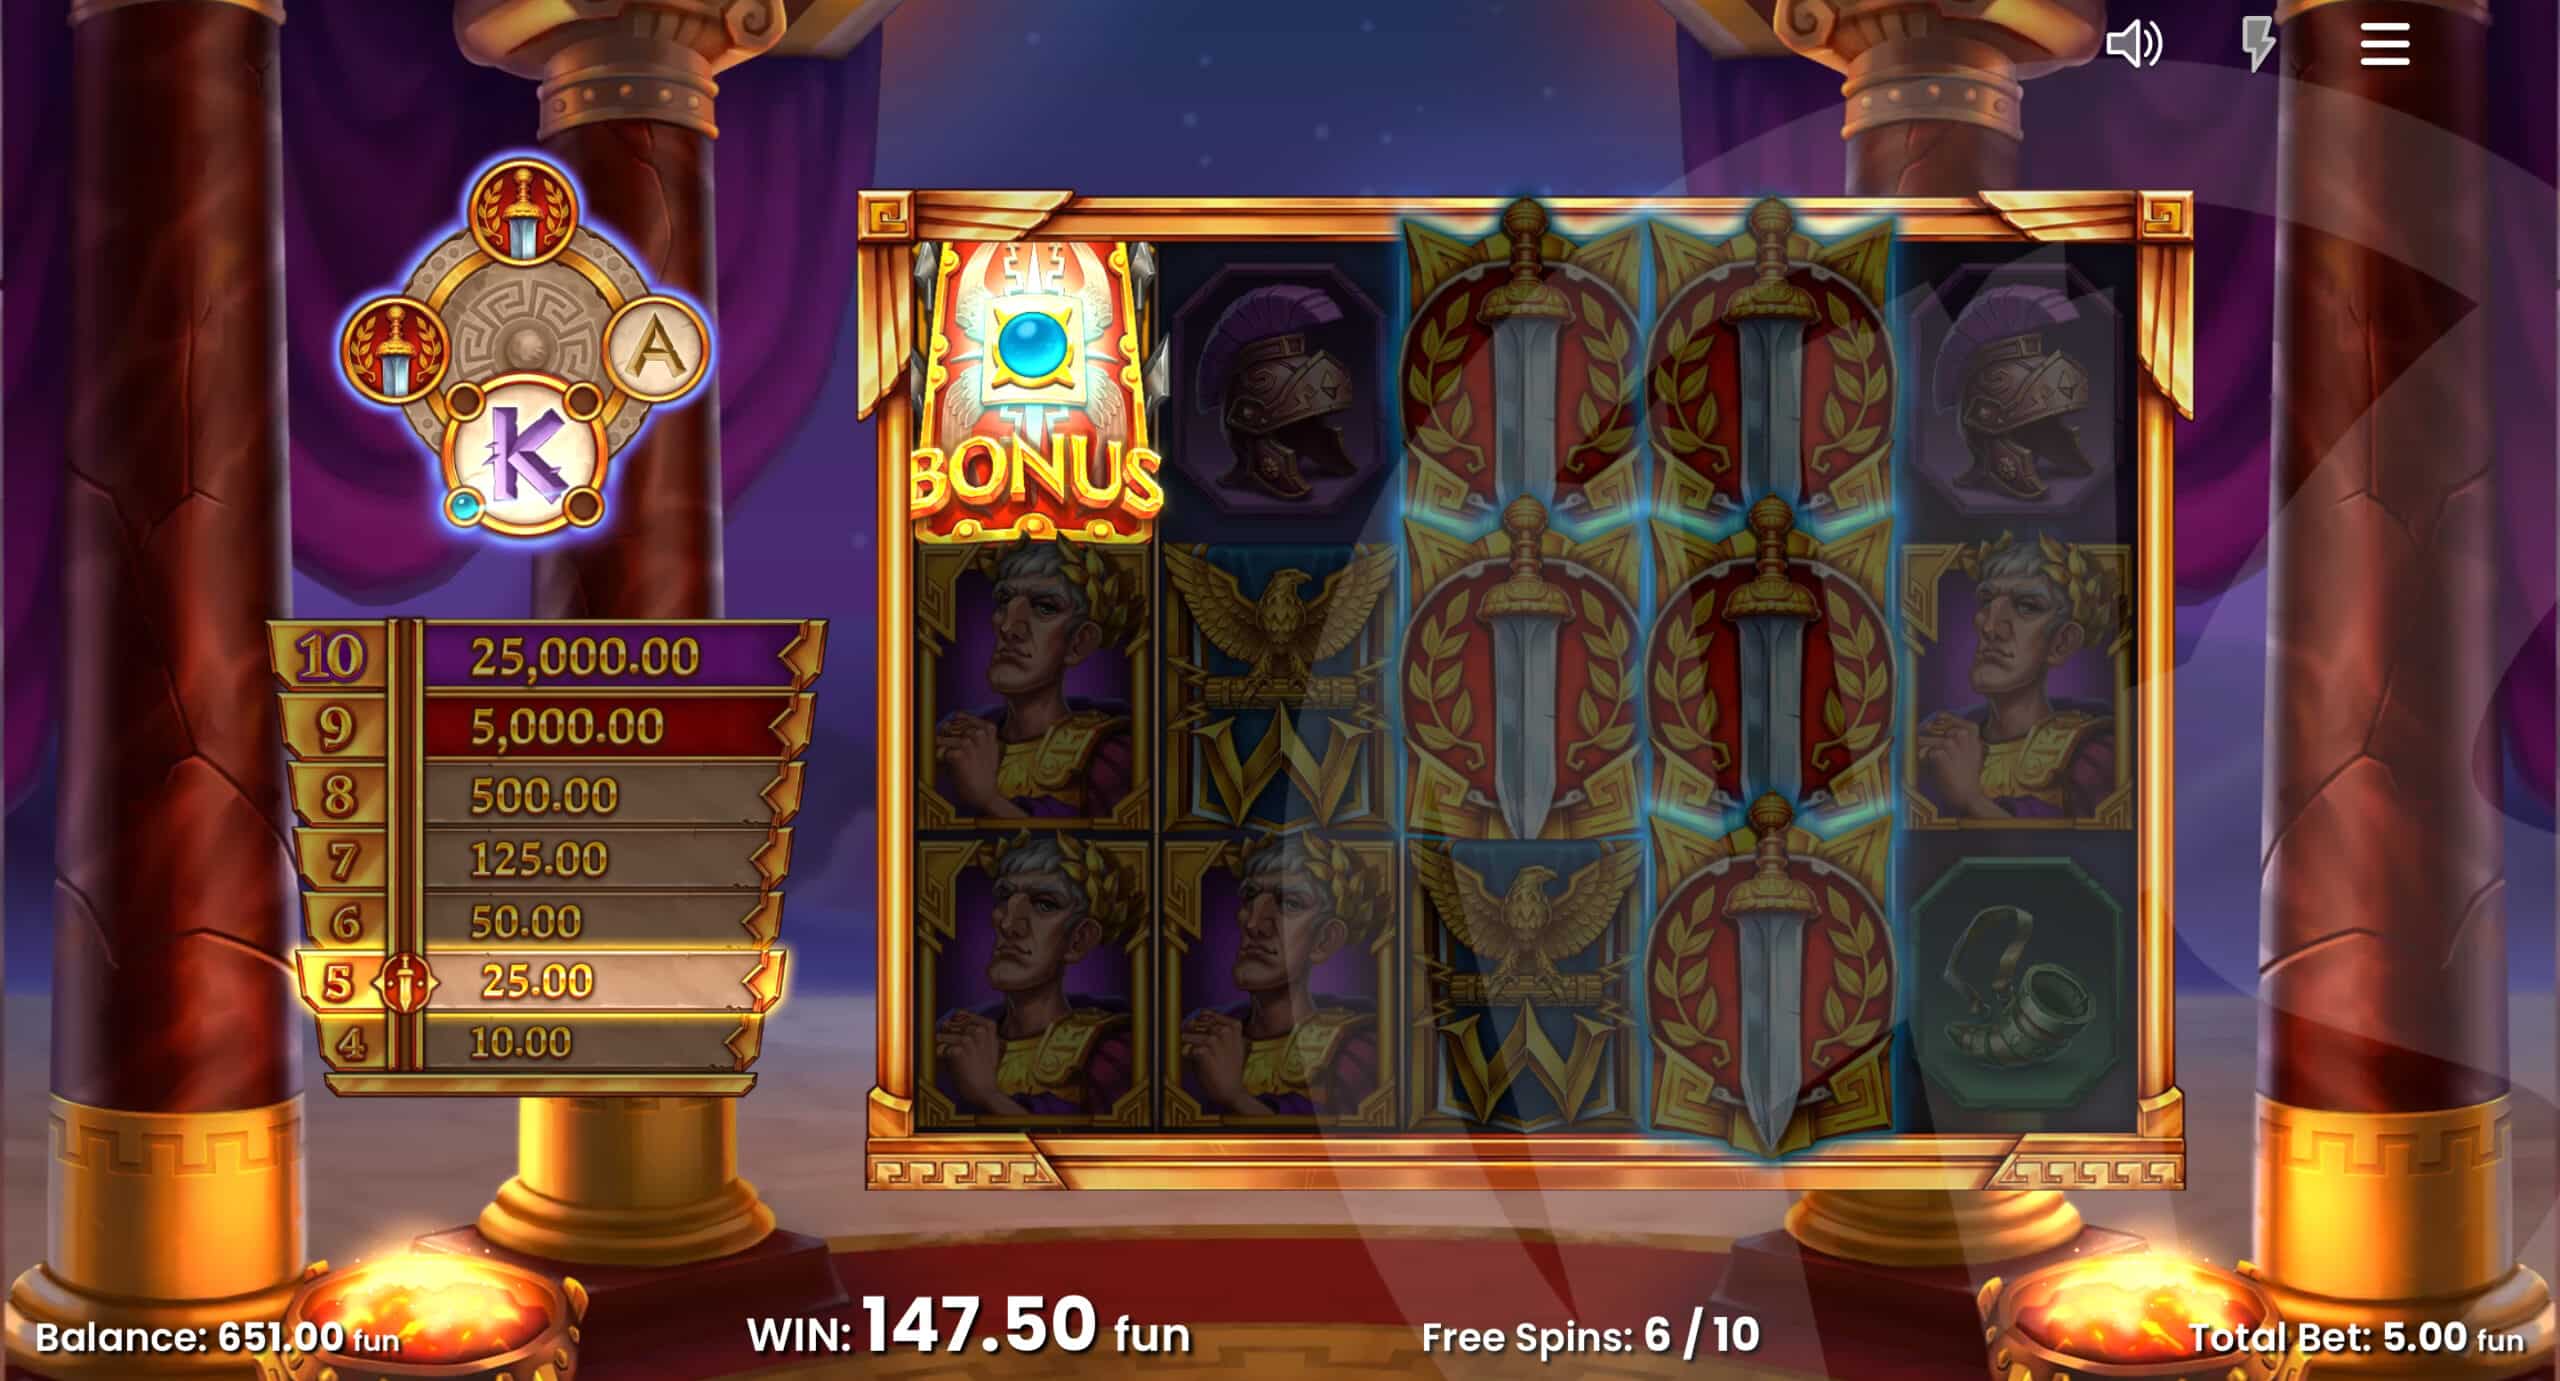 Shield Symbols are Collected to Convert Low Paying Symbols During Free Spins